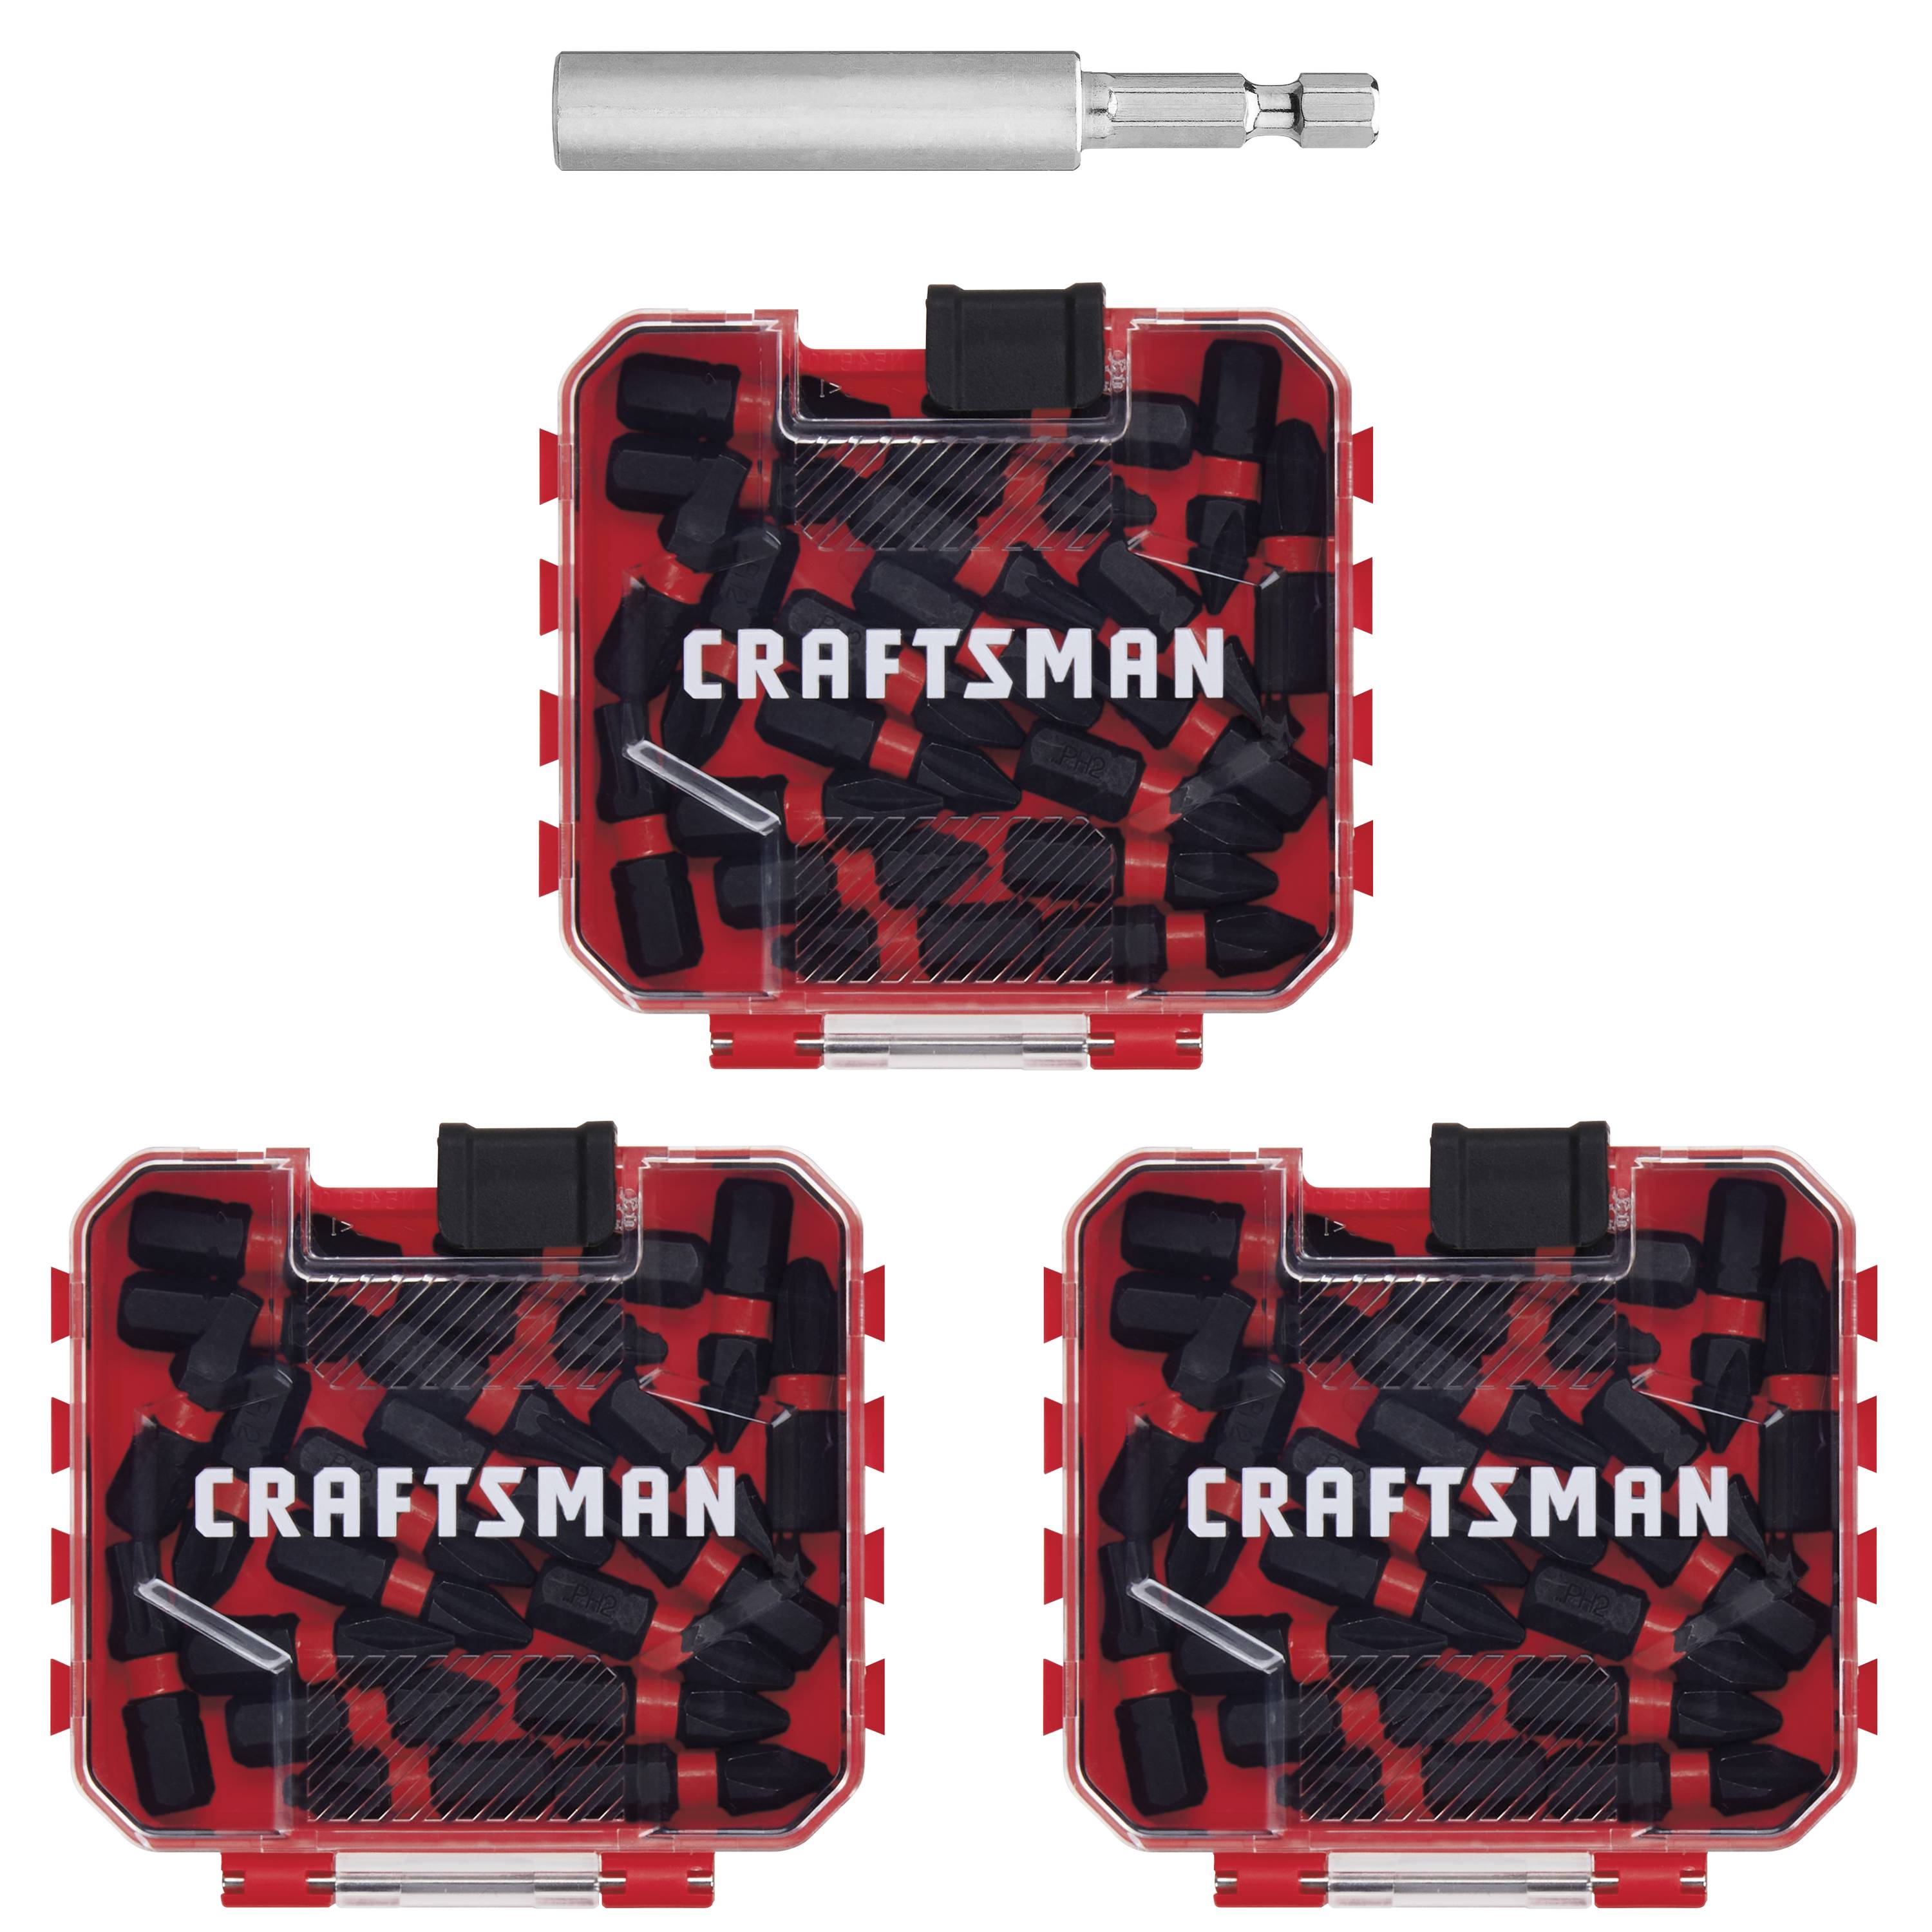 CRAFTSMAN Impact Rated 1-in the Set in Bit department Screwdriver Bits Screwdriver (60-Piece) at